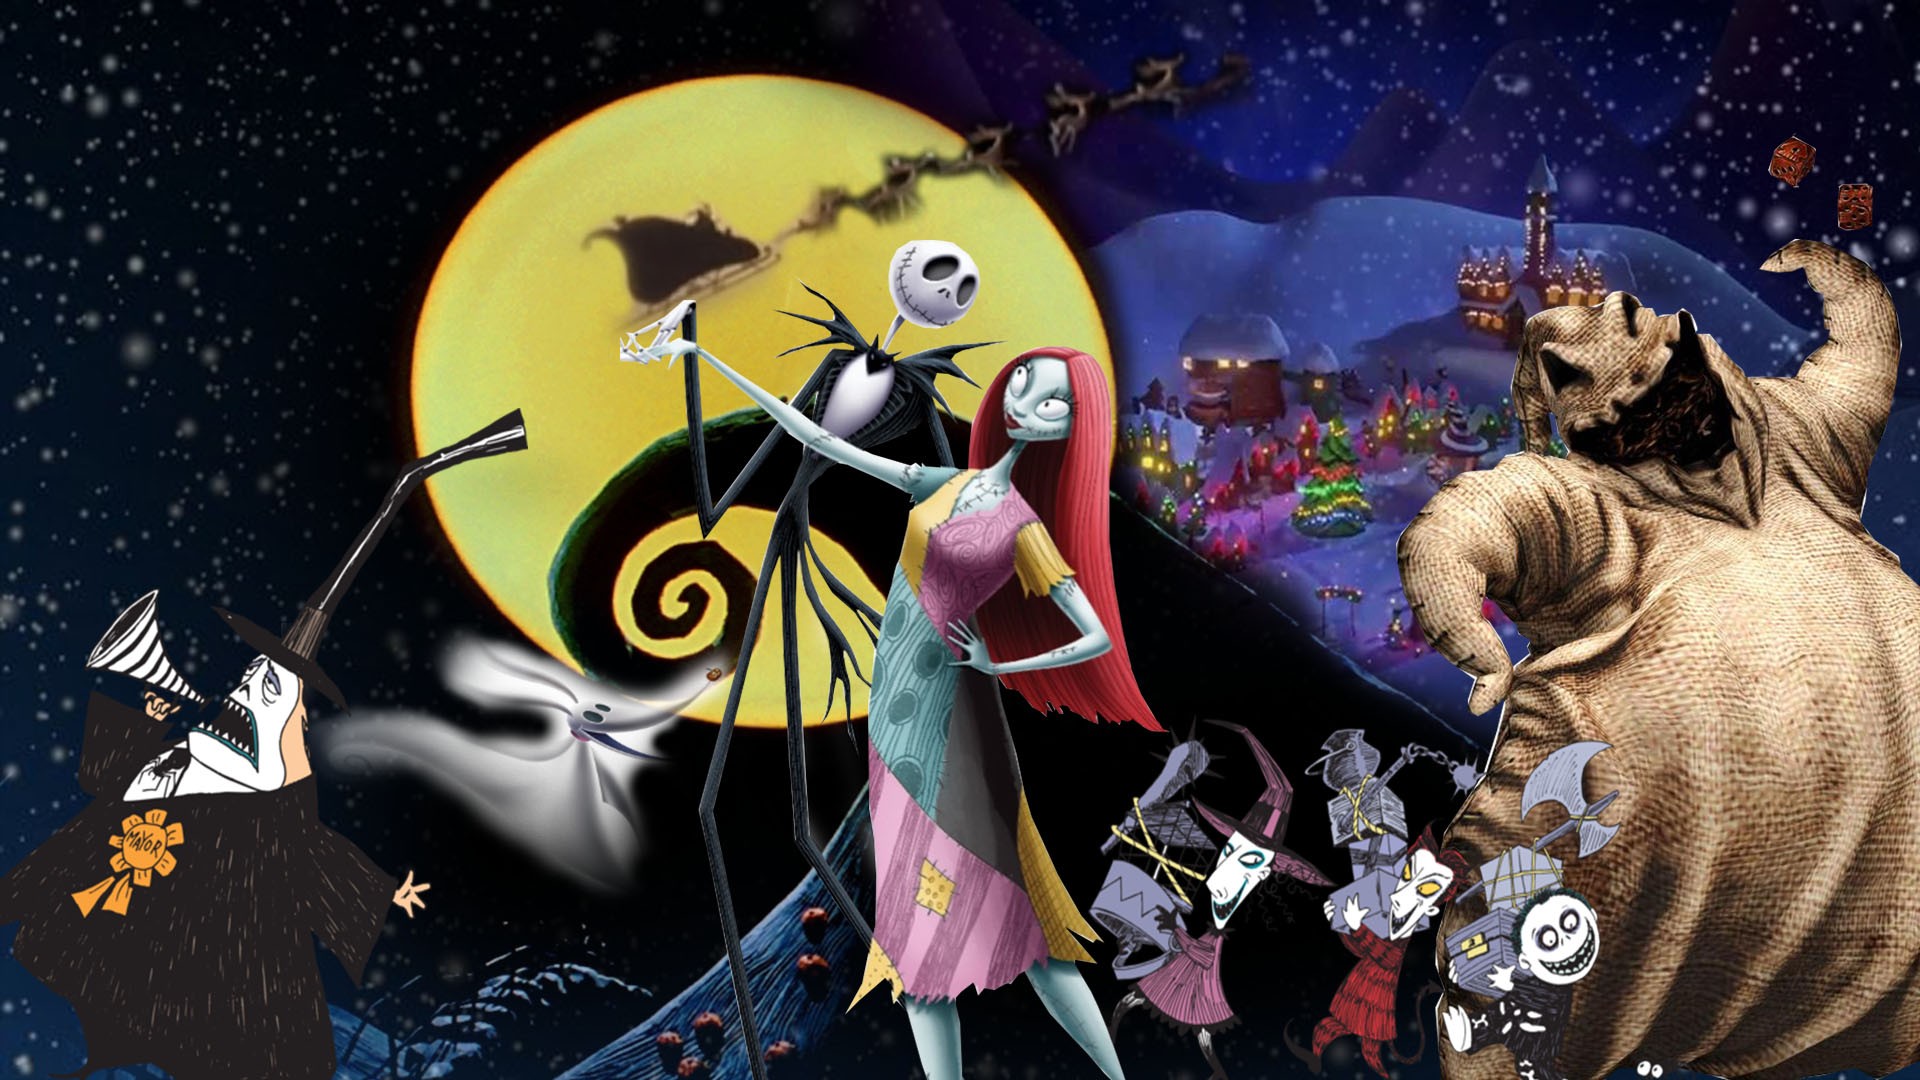 The Nightmare Before Christmas Wallpaper with high-resolution 1920x1080 pixel. You can use this poster wallpaper for your Desktop Computers, Mac Screensavers, Windows Backgrounds, iPhone Wallpapers, Tablet or Android Lock screen and another Mobile device